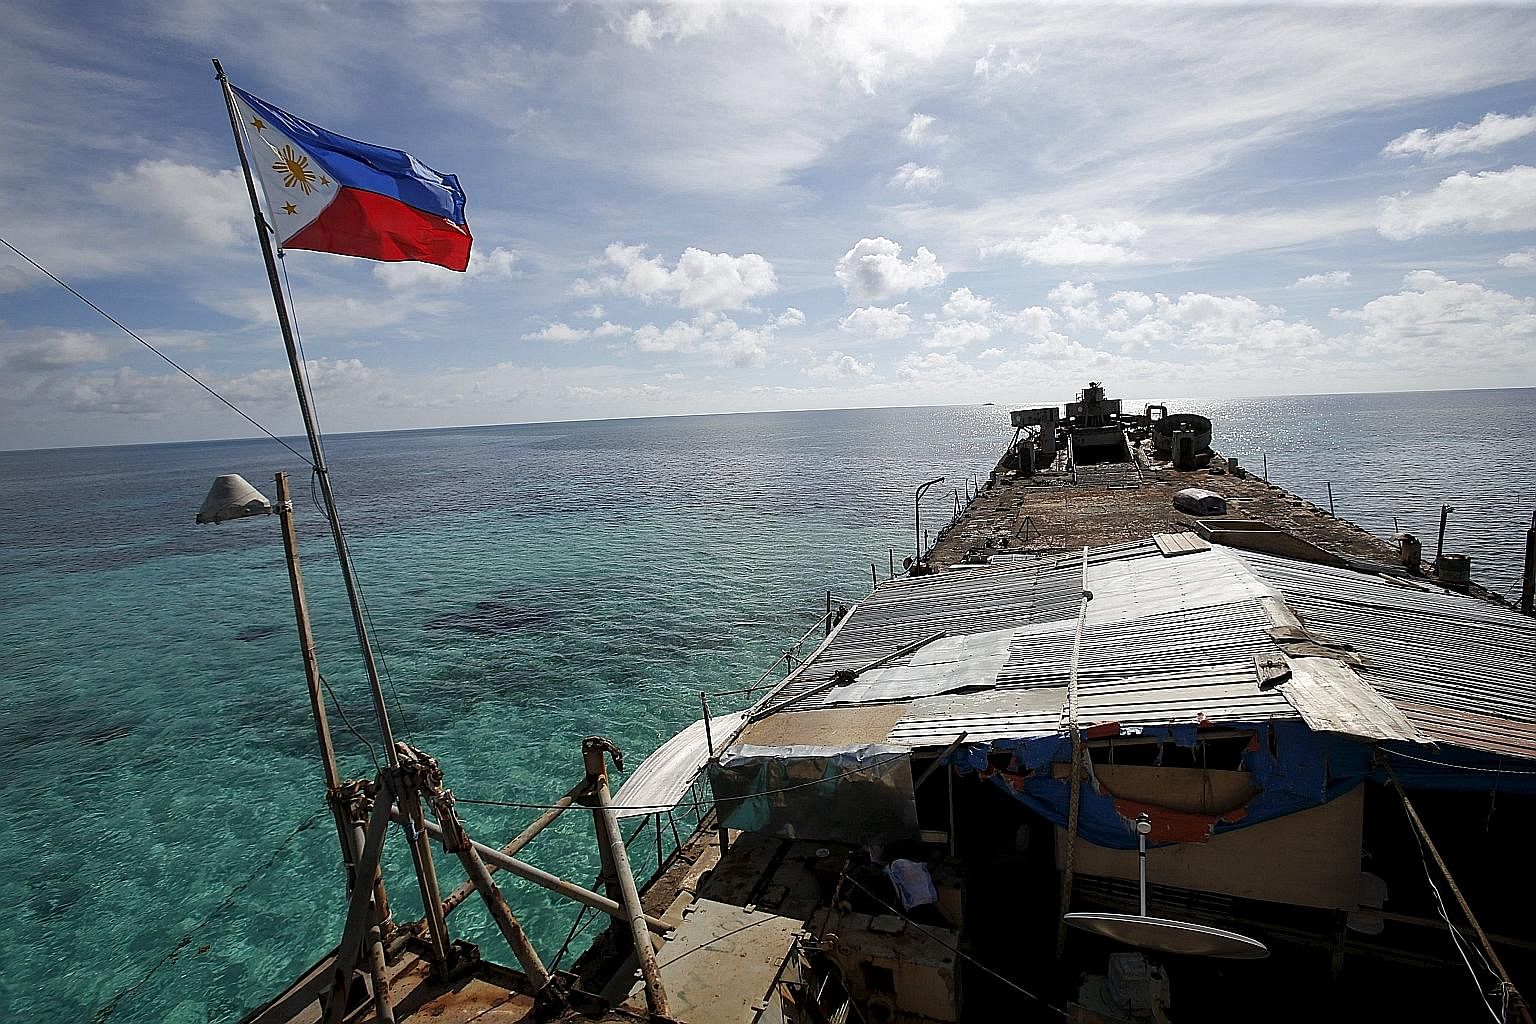 The BRP Sierra Madre, a Philippine Navy ship that has been aground on the disputed Second Thomas Shoal, part of the Spratly Islands, since 1999. One analyst says China may seek to "punish" the Philippines after the Permanent Court of Arbitration's ru